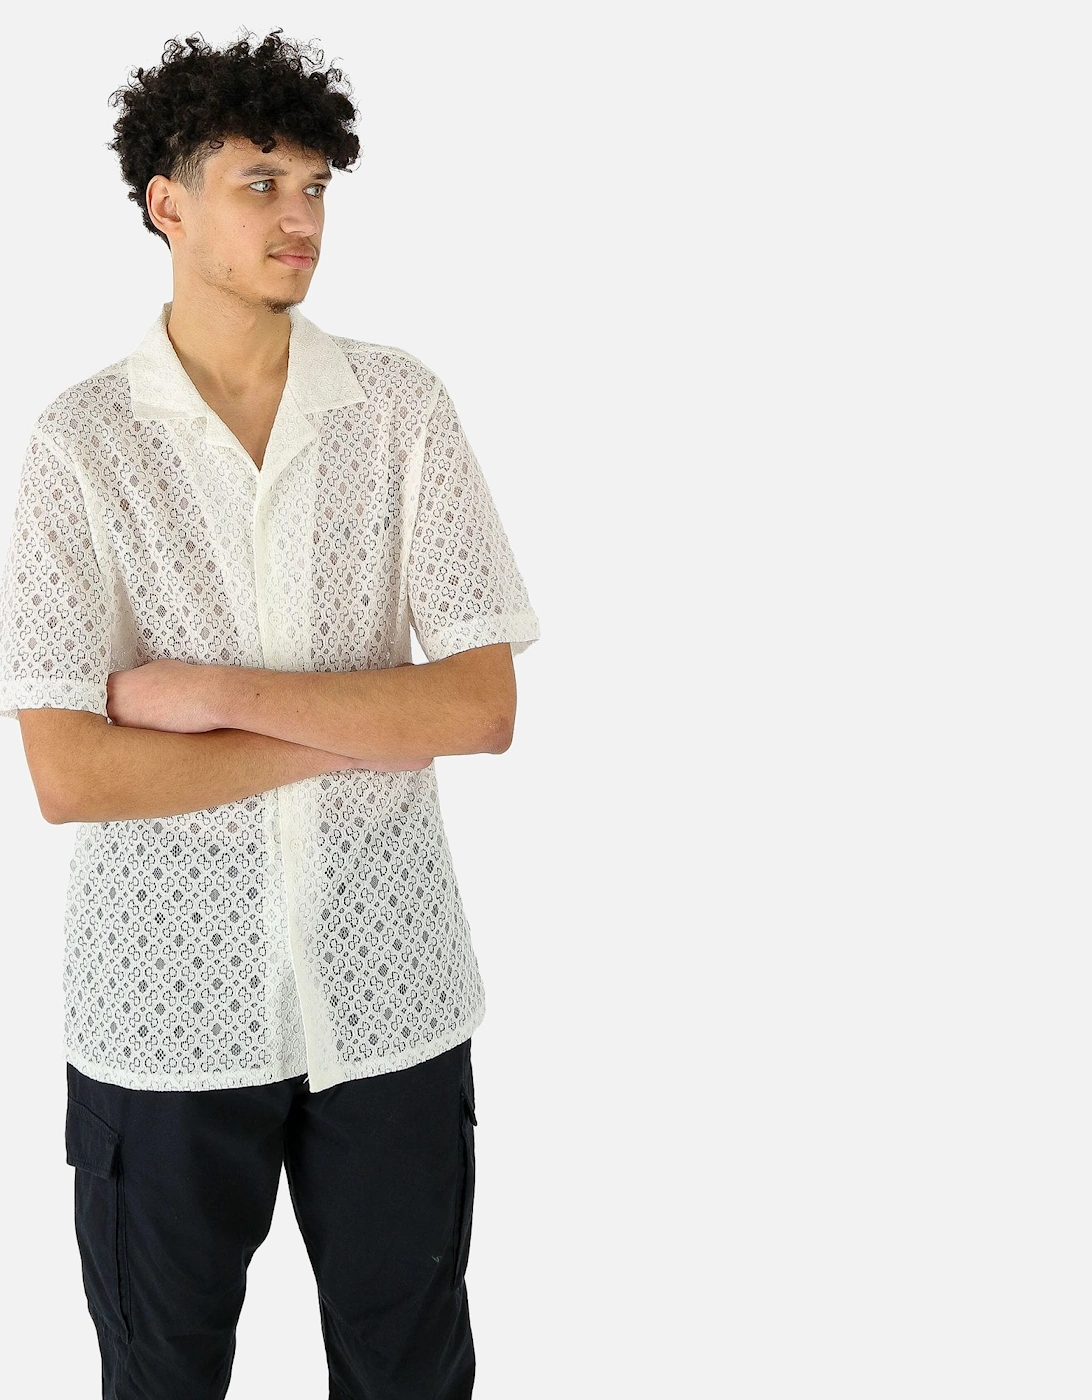 Didcot Corded Lace White SS Shirt